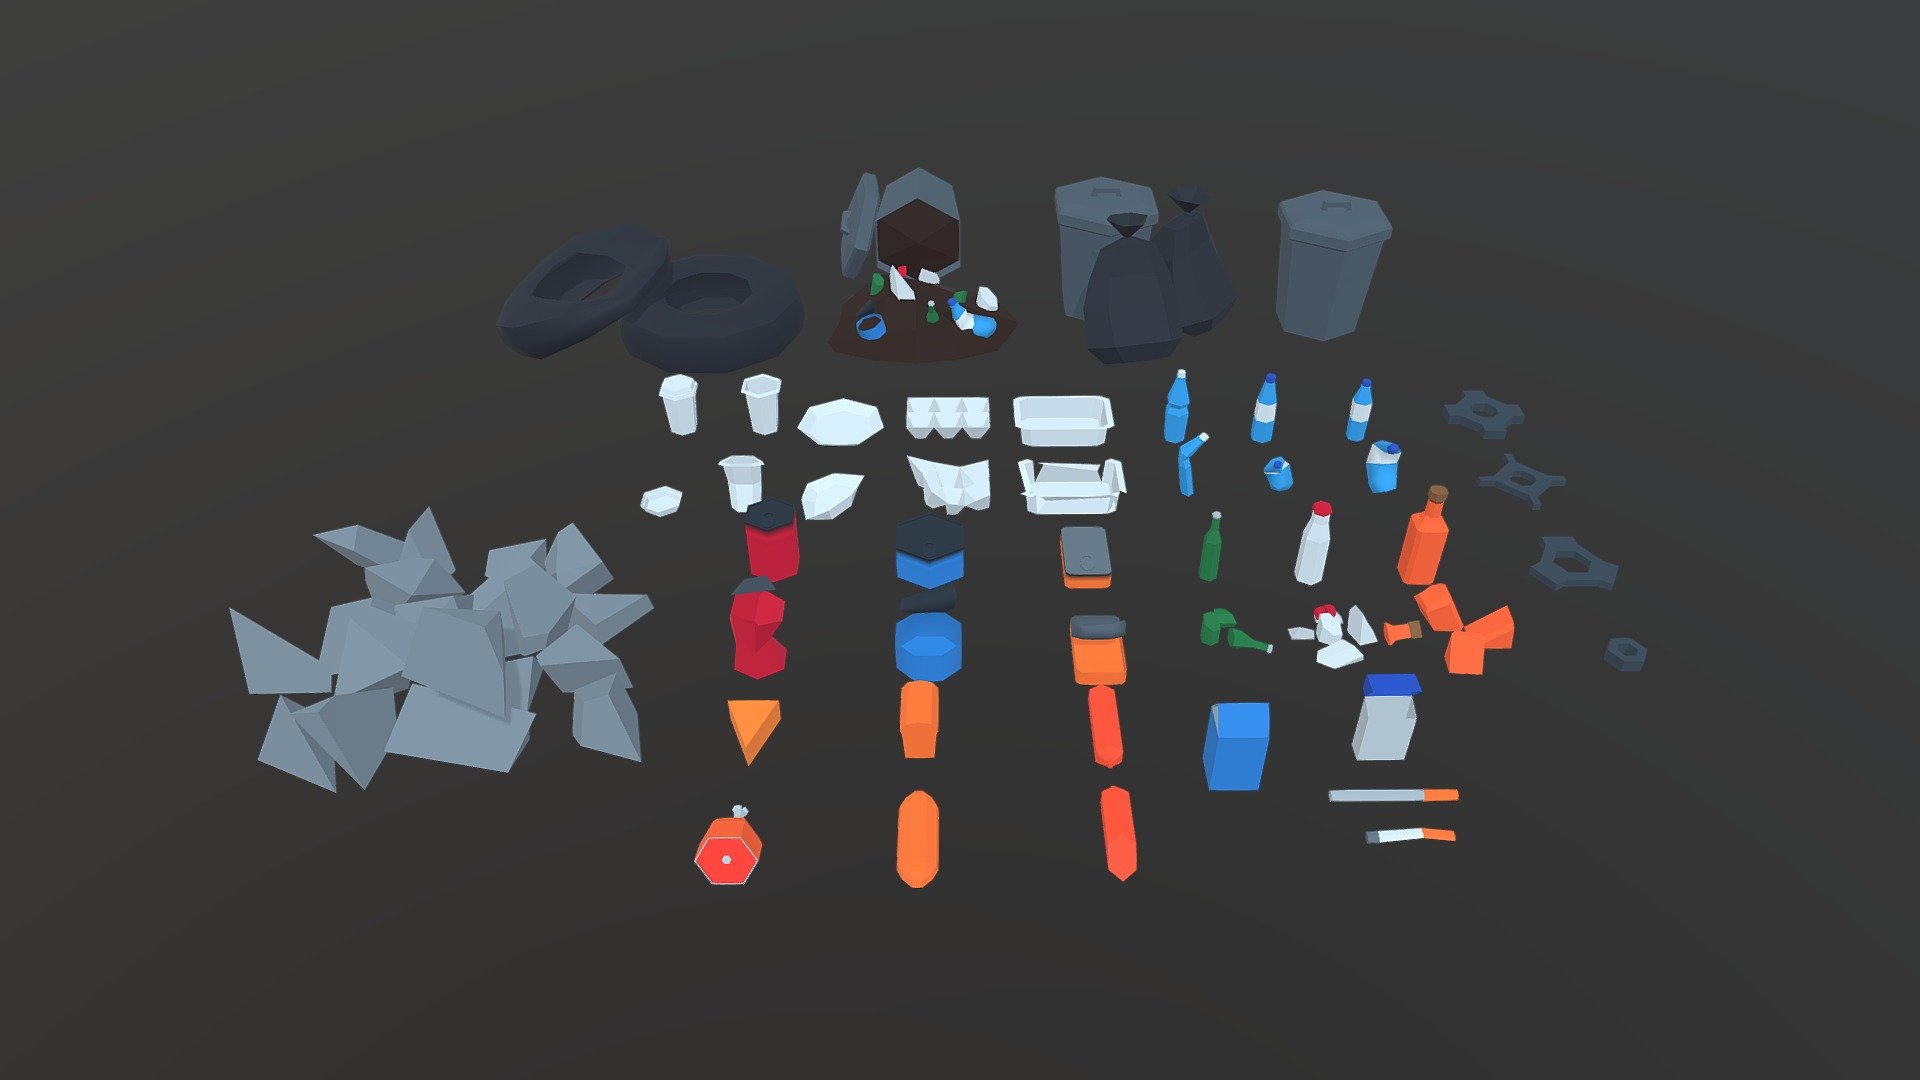 Game Ready Low Poly Trash Pack is made for mobile games. There are 47 models in total.

Painted with color palette for more optimization - Low Poly Recycle and Garbage Package - 3D model by BayYigit 3d model